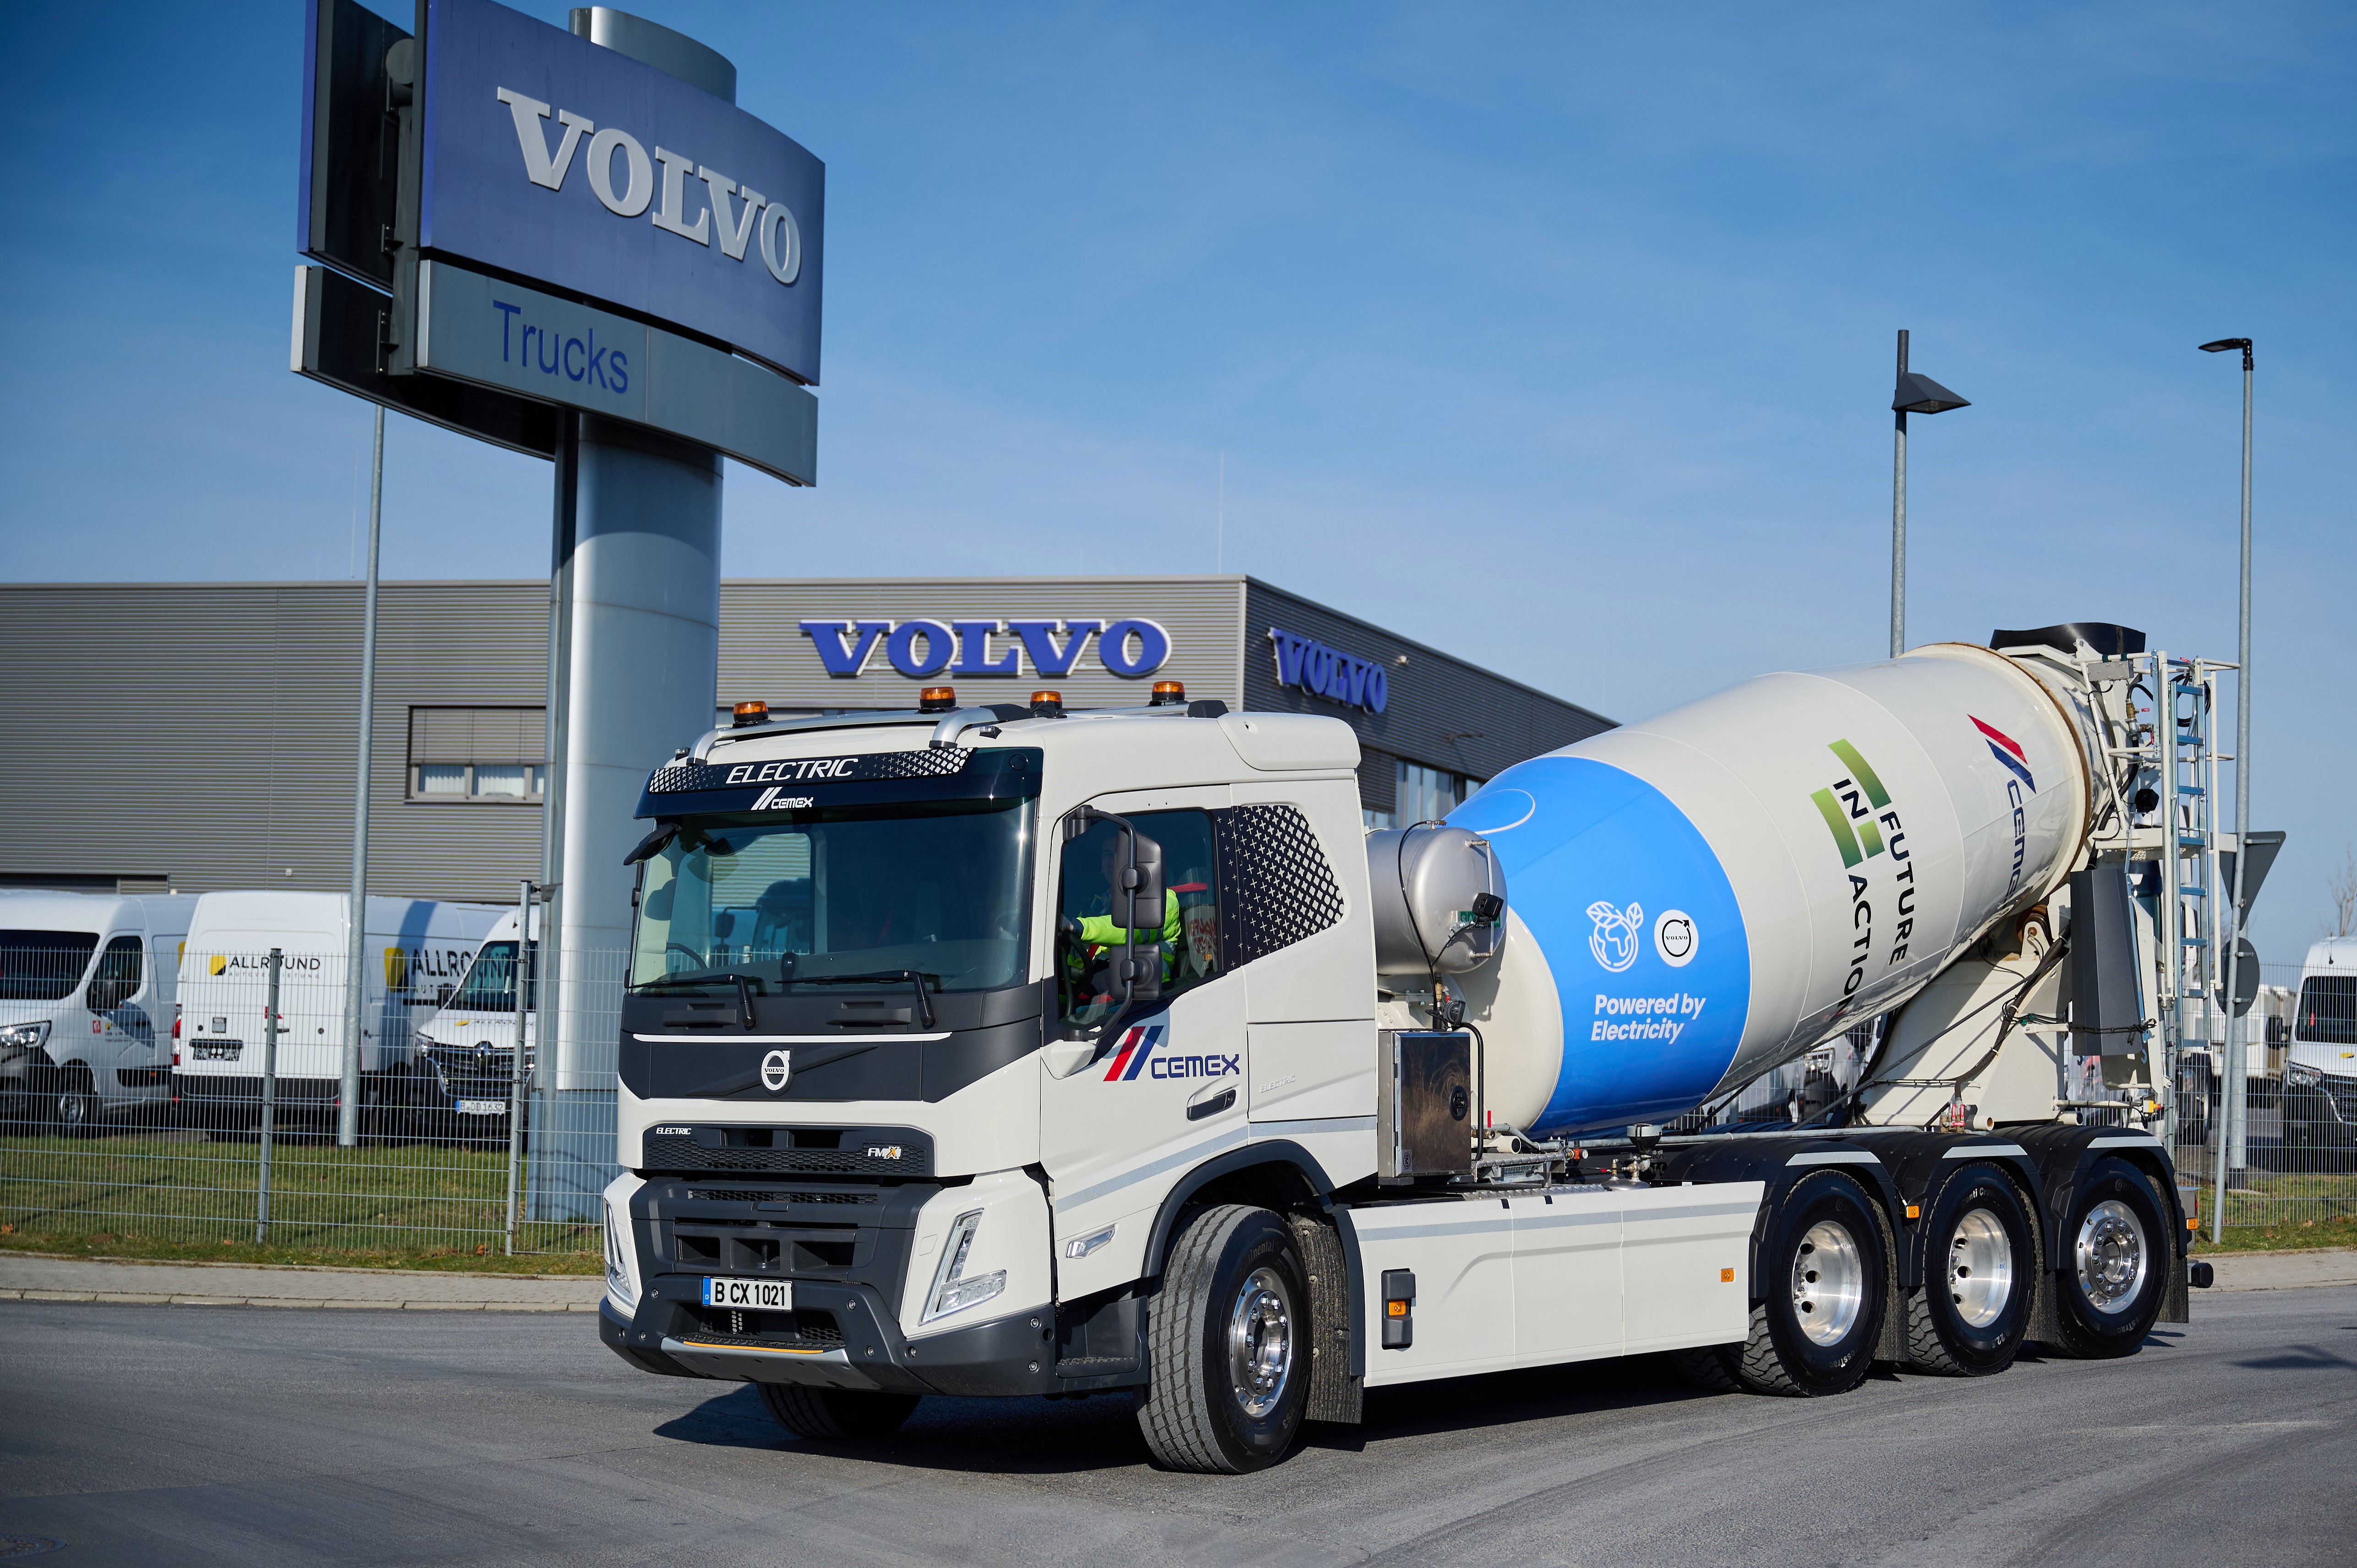 Volvo delivers the first electric concrete mixer truck to CEMEX